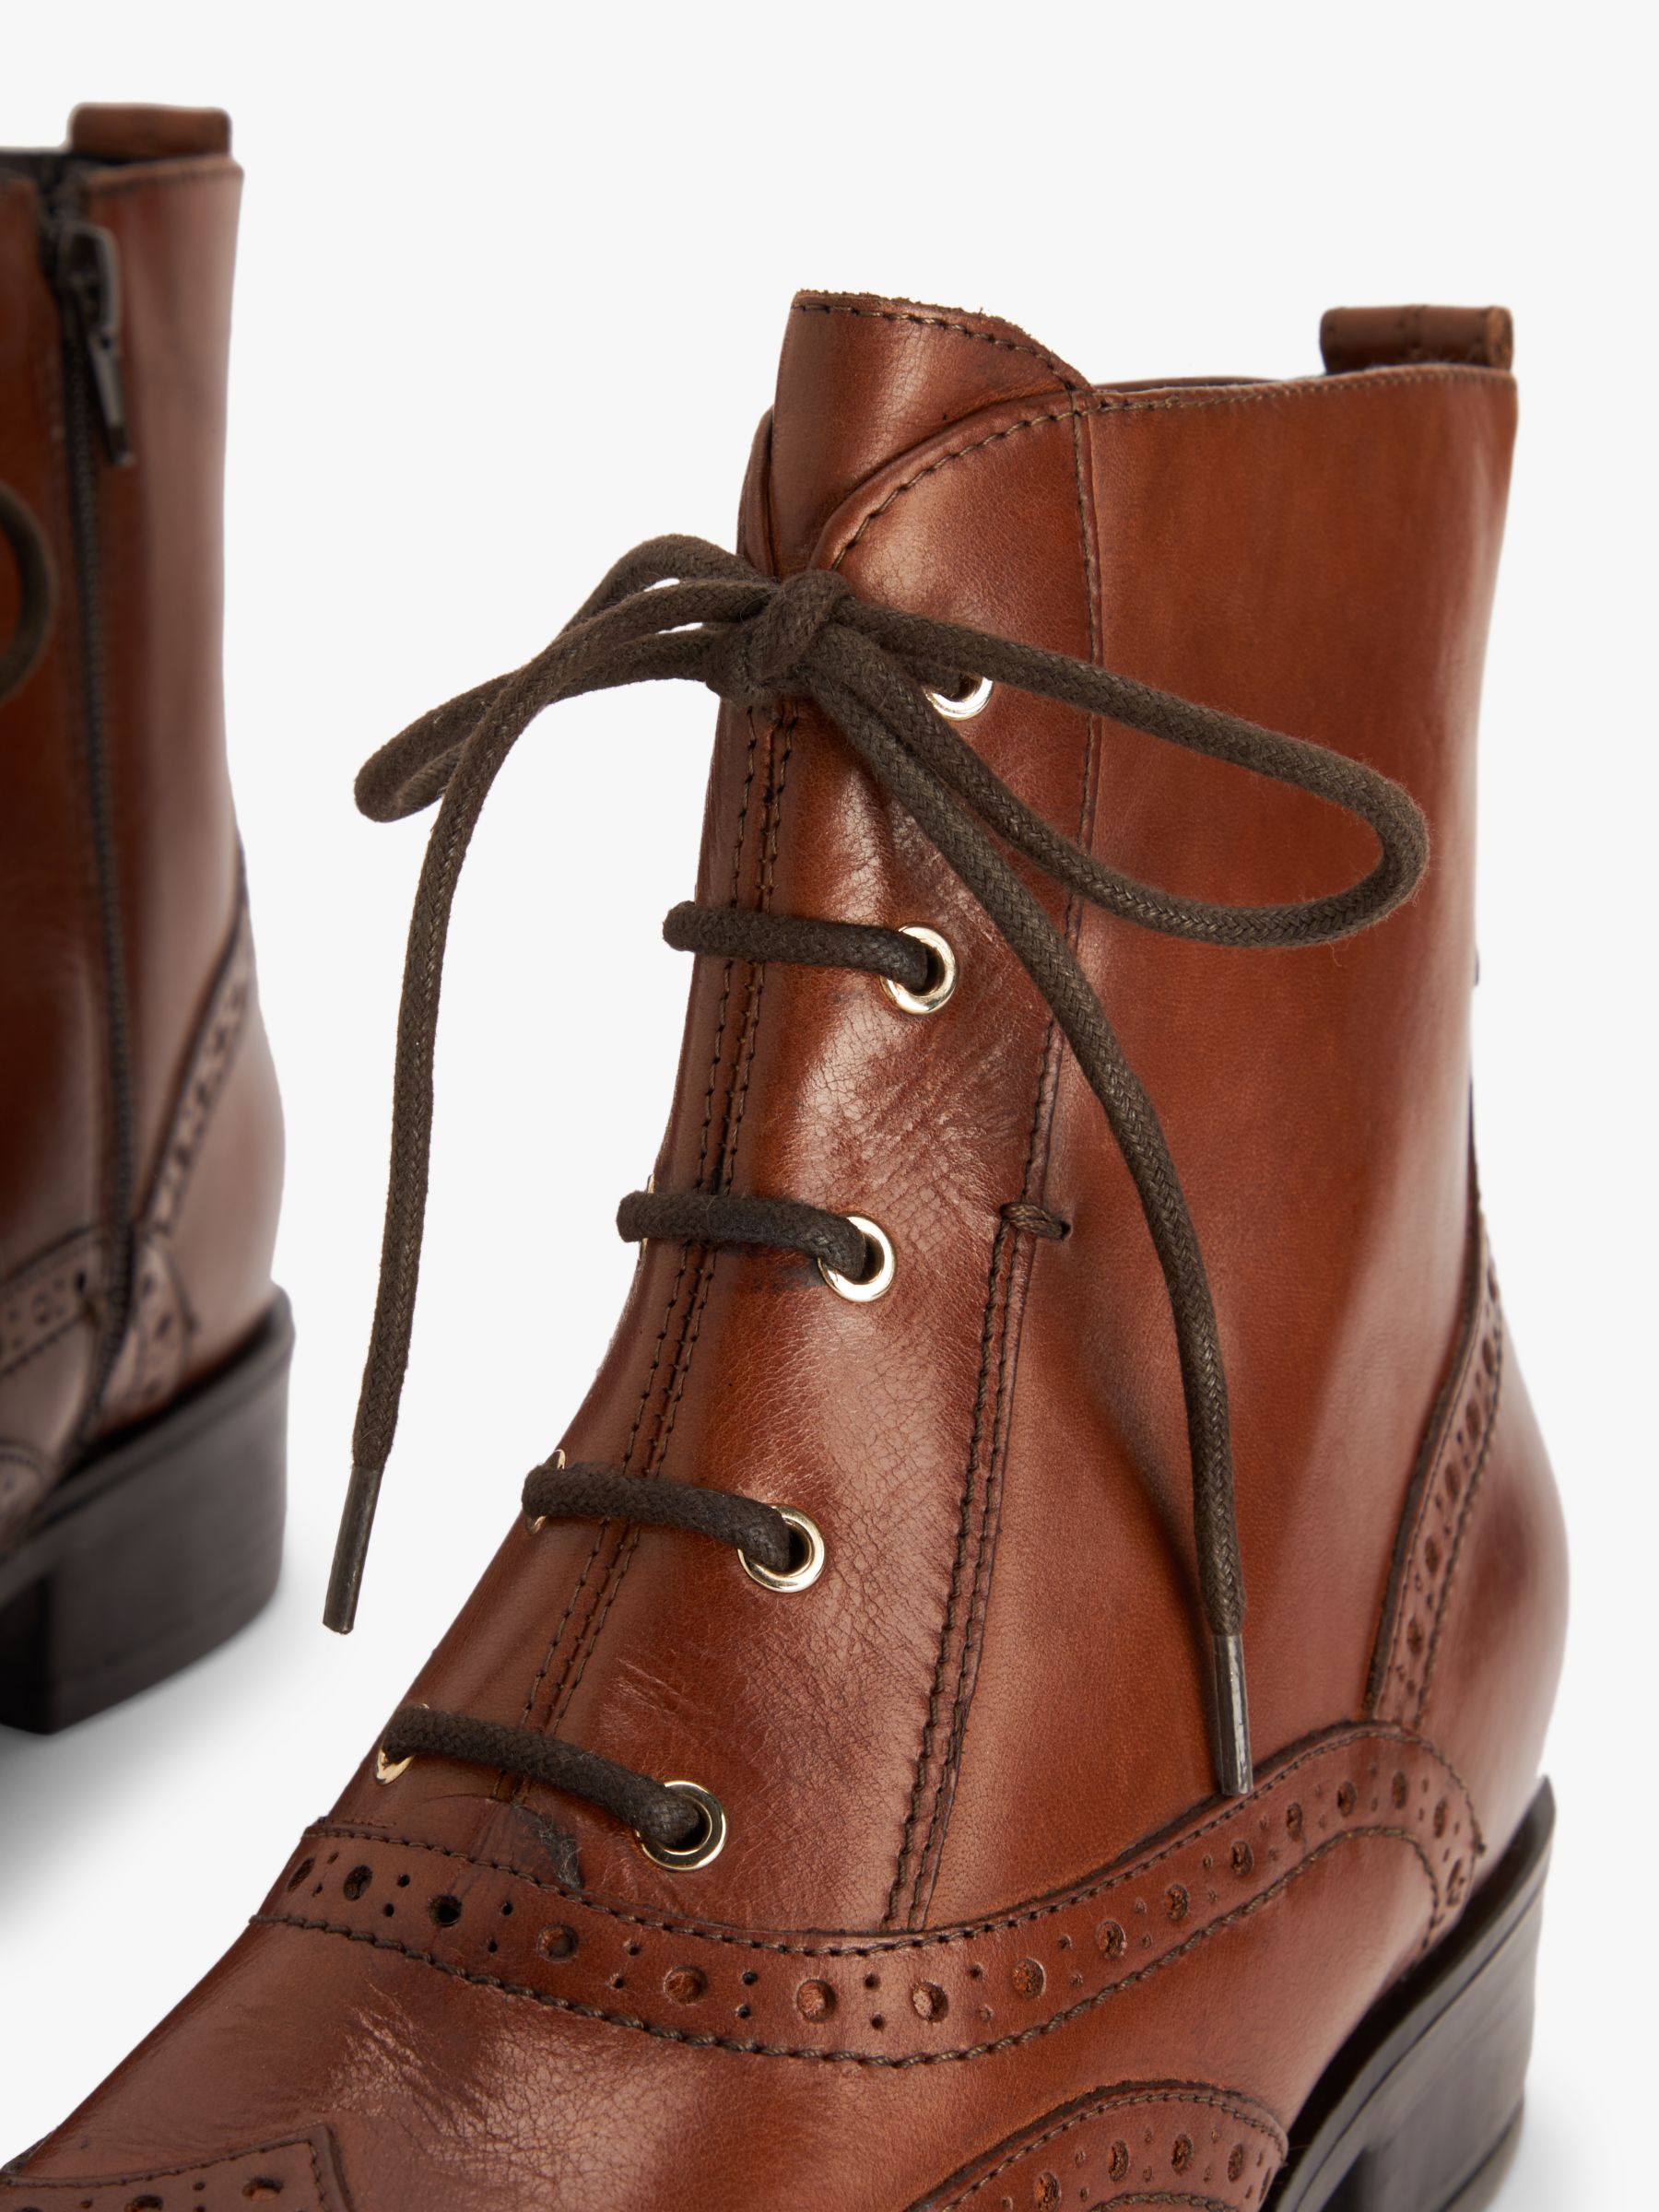 John Lewis Camie Leather Brogue Detail Lace Up Ankle Boots, Chestnut, 8